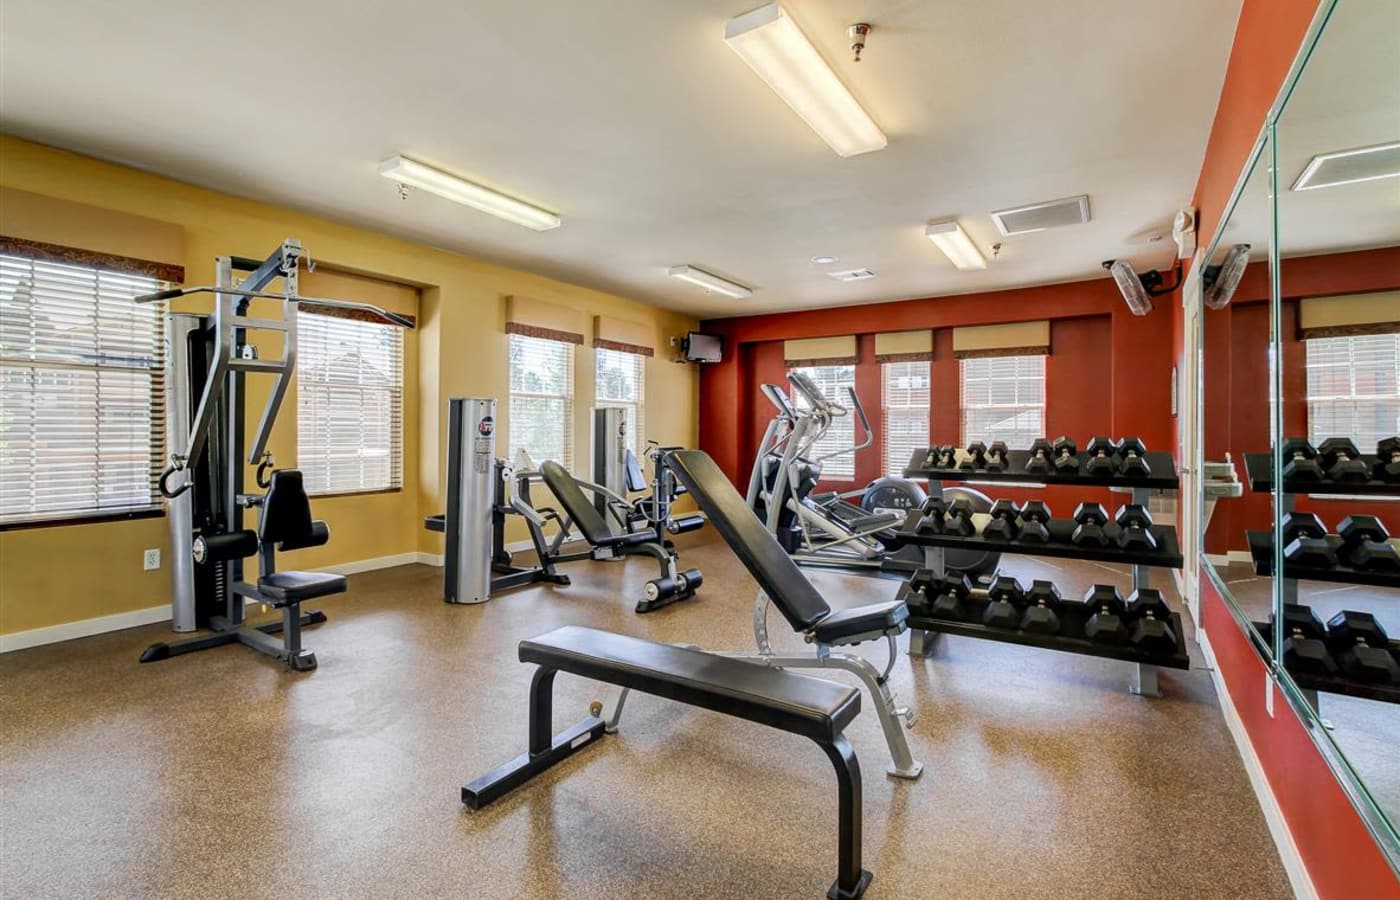 Well-equipped fitness center at Sterling Pointe in Flagstaff, AZ